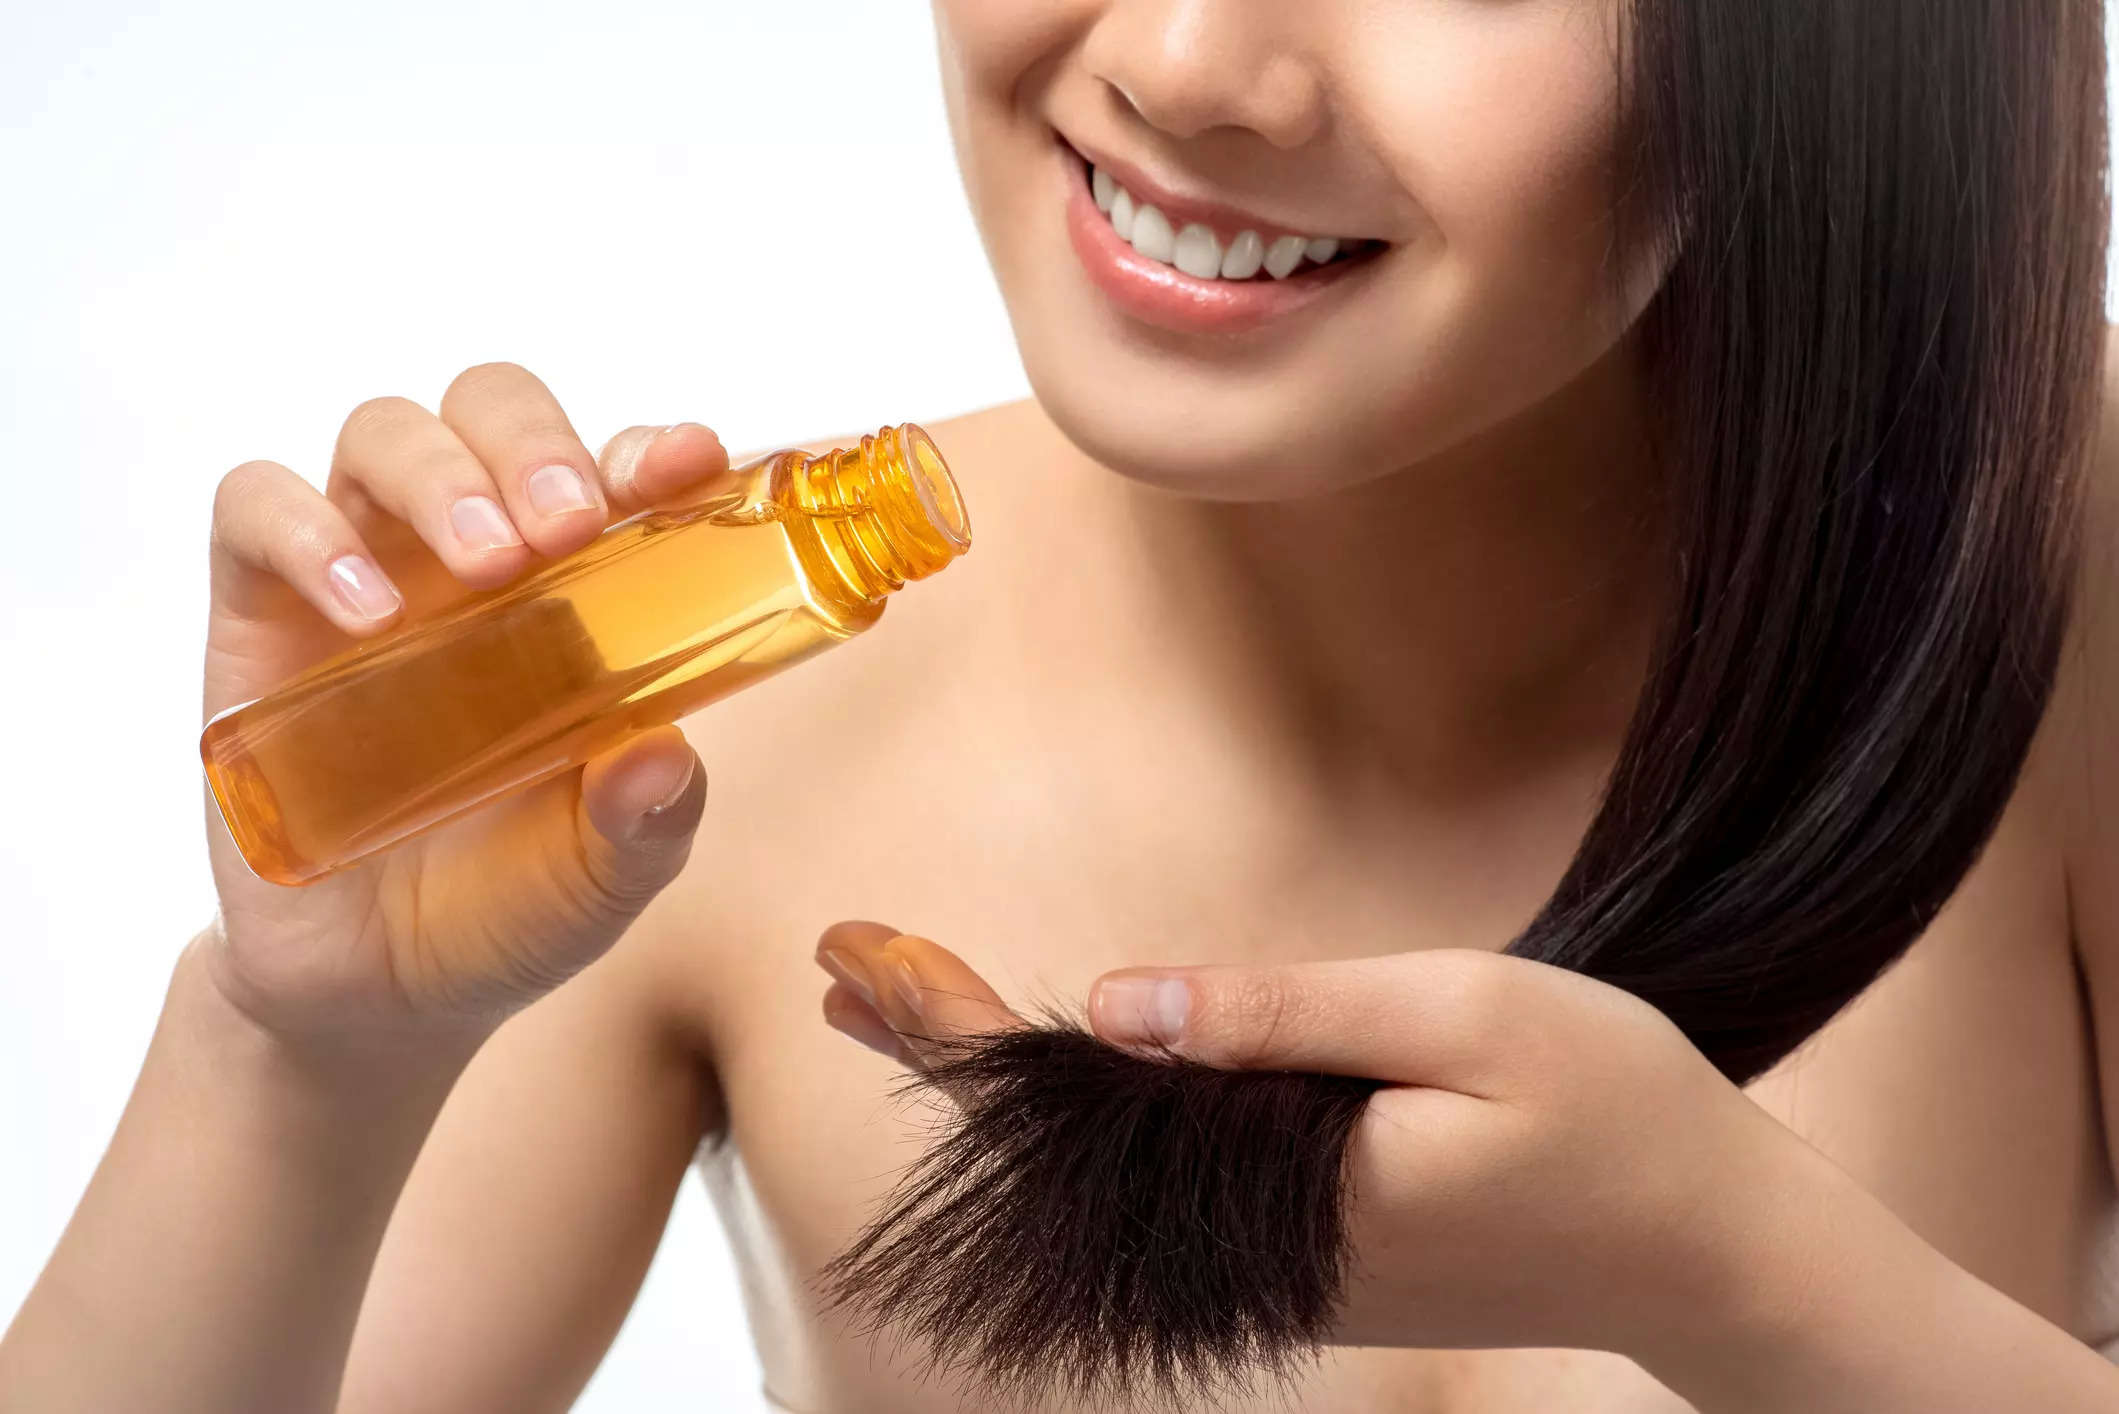 Hair oiling mistakes: 5 ways it could lead to hair fall